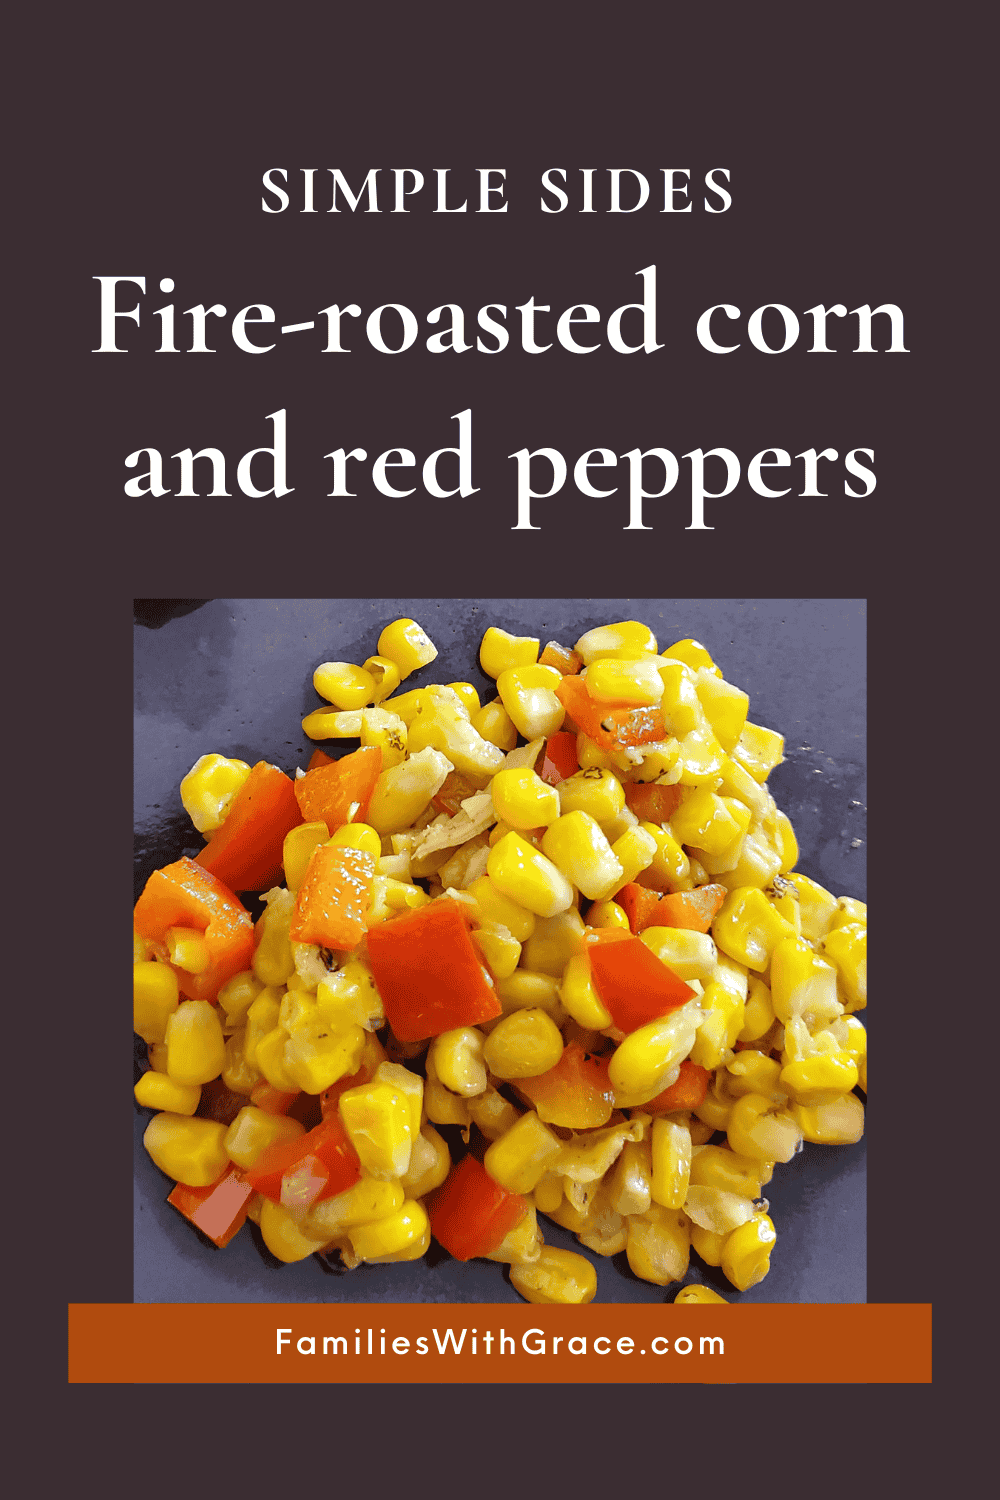 Fire-roasted corn and red peppers